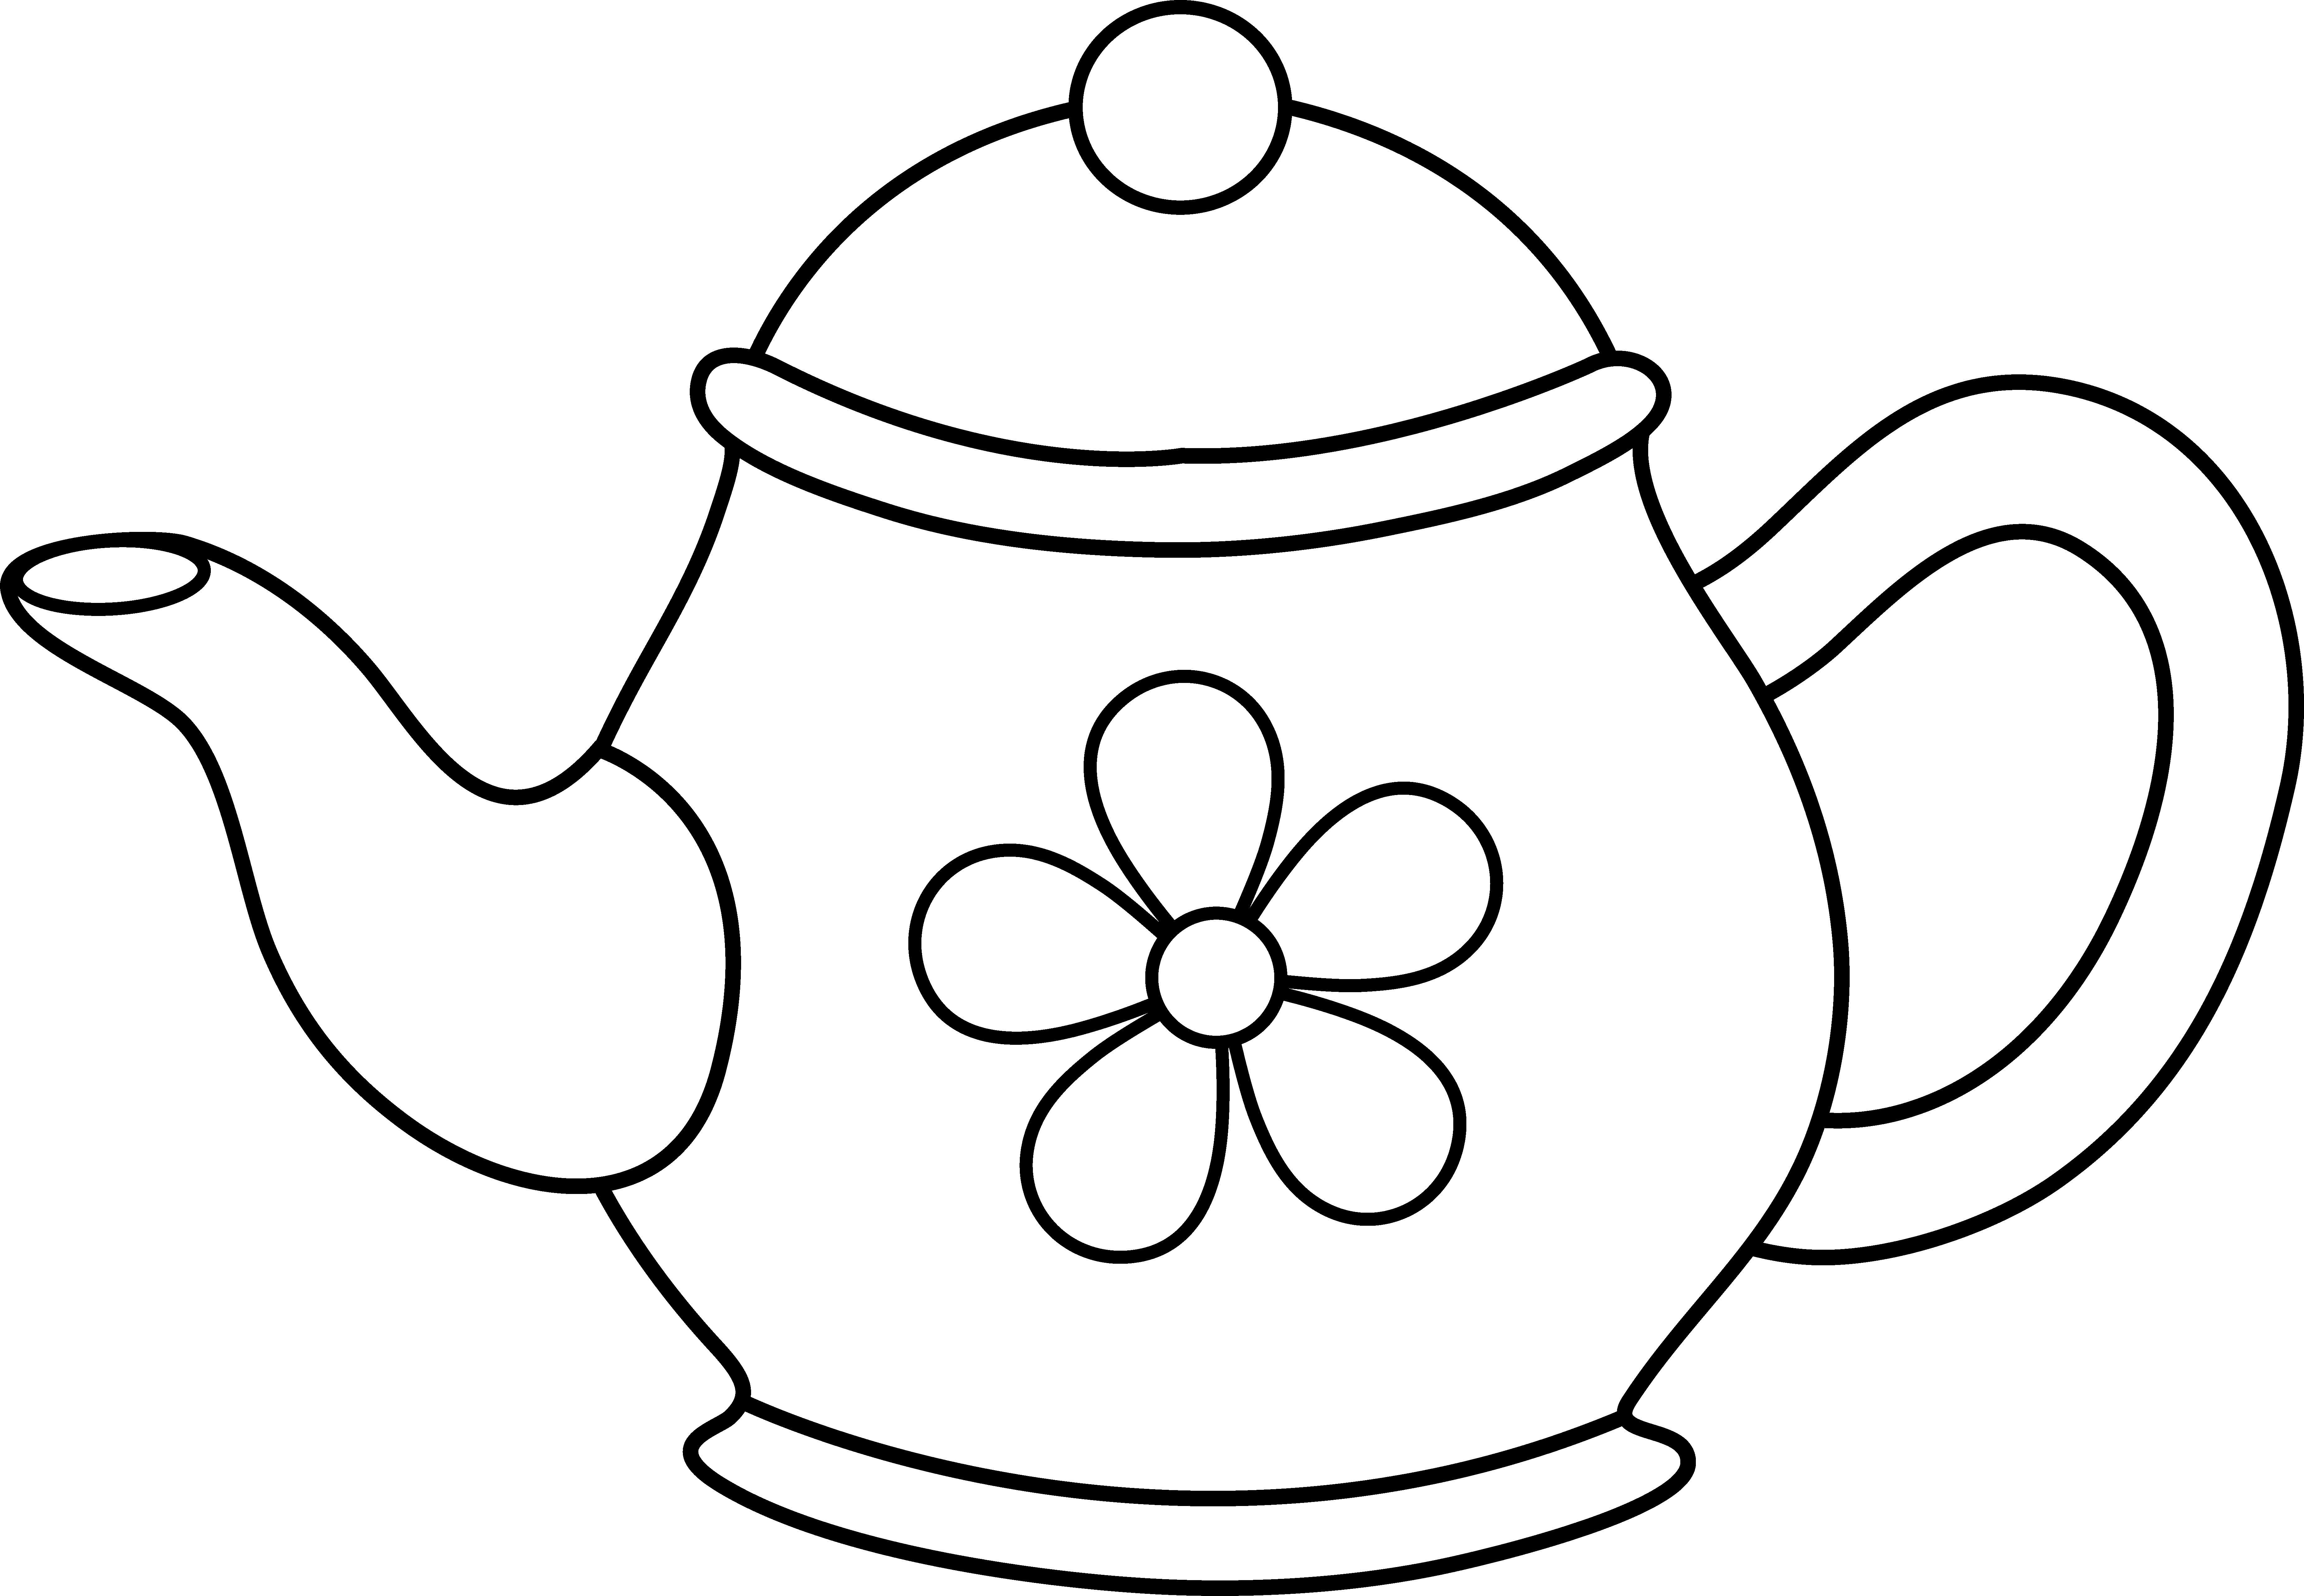 Free Teapot Outline, Download Free Teapot Outline png images, Free